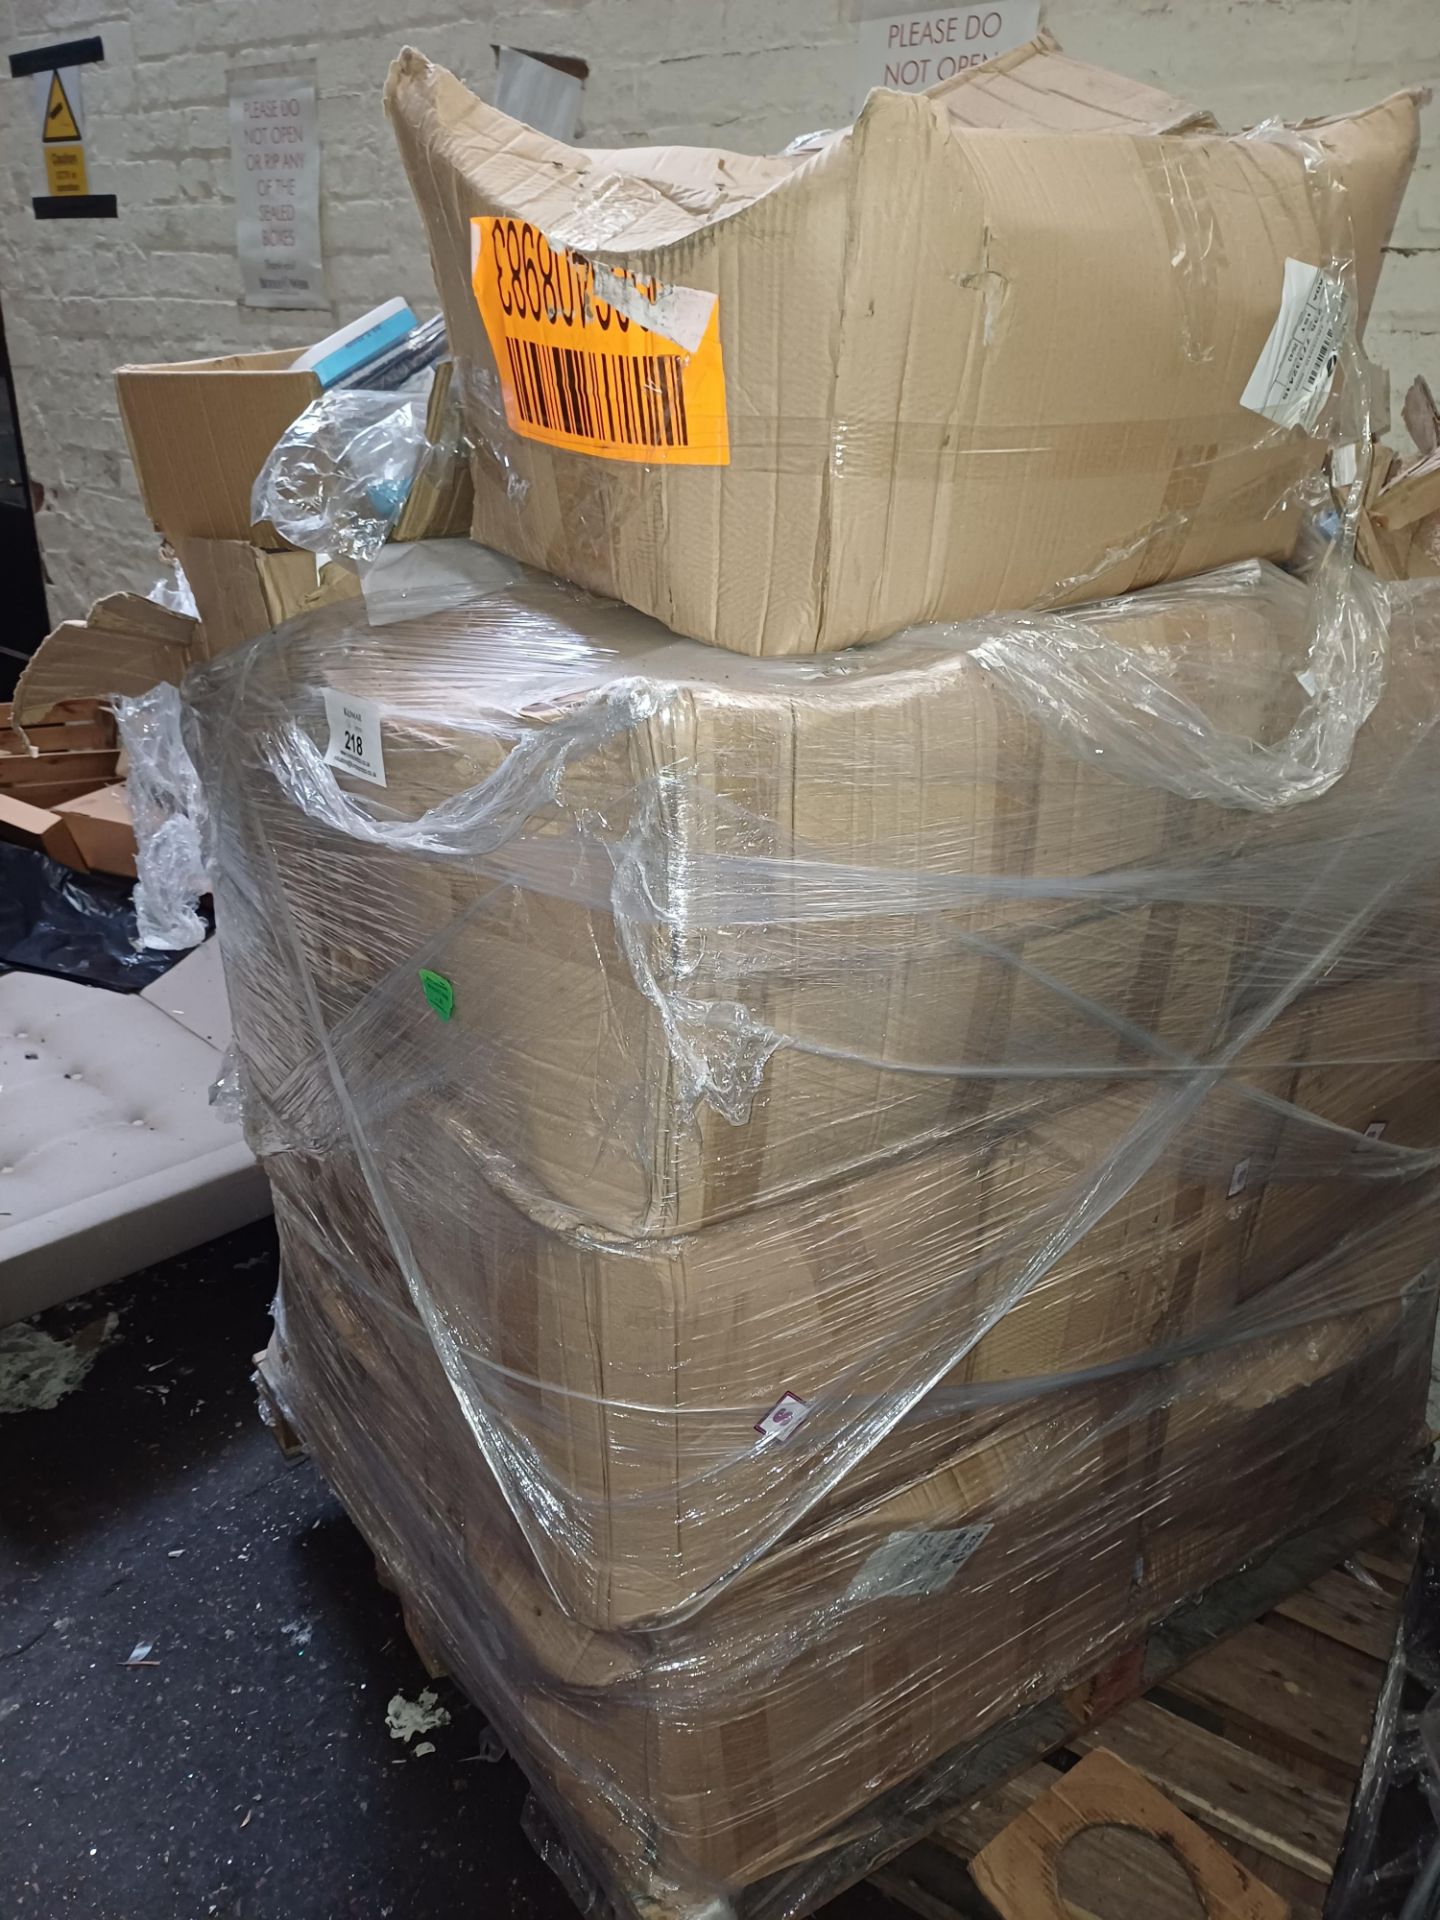 Pallet of Facemasks - Image 4 of 5